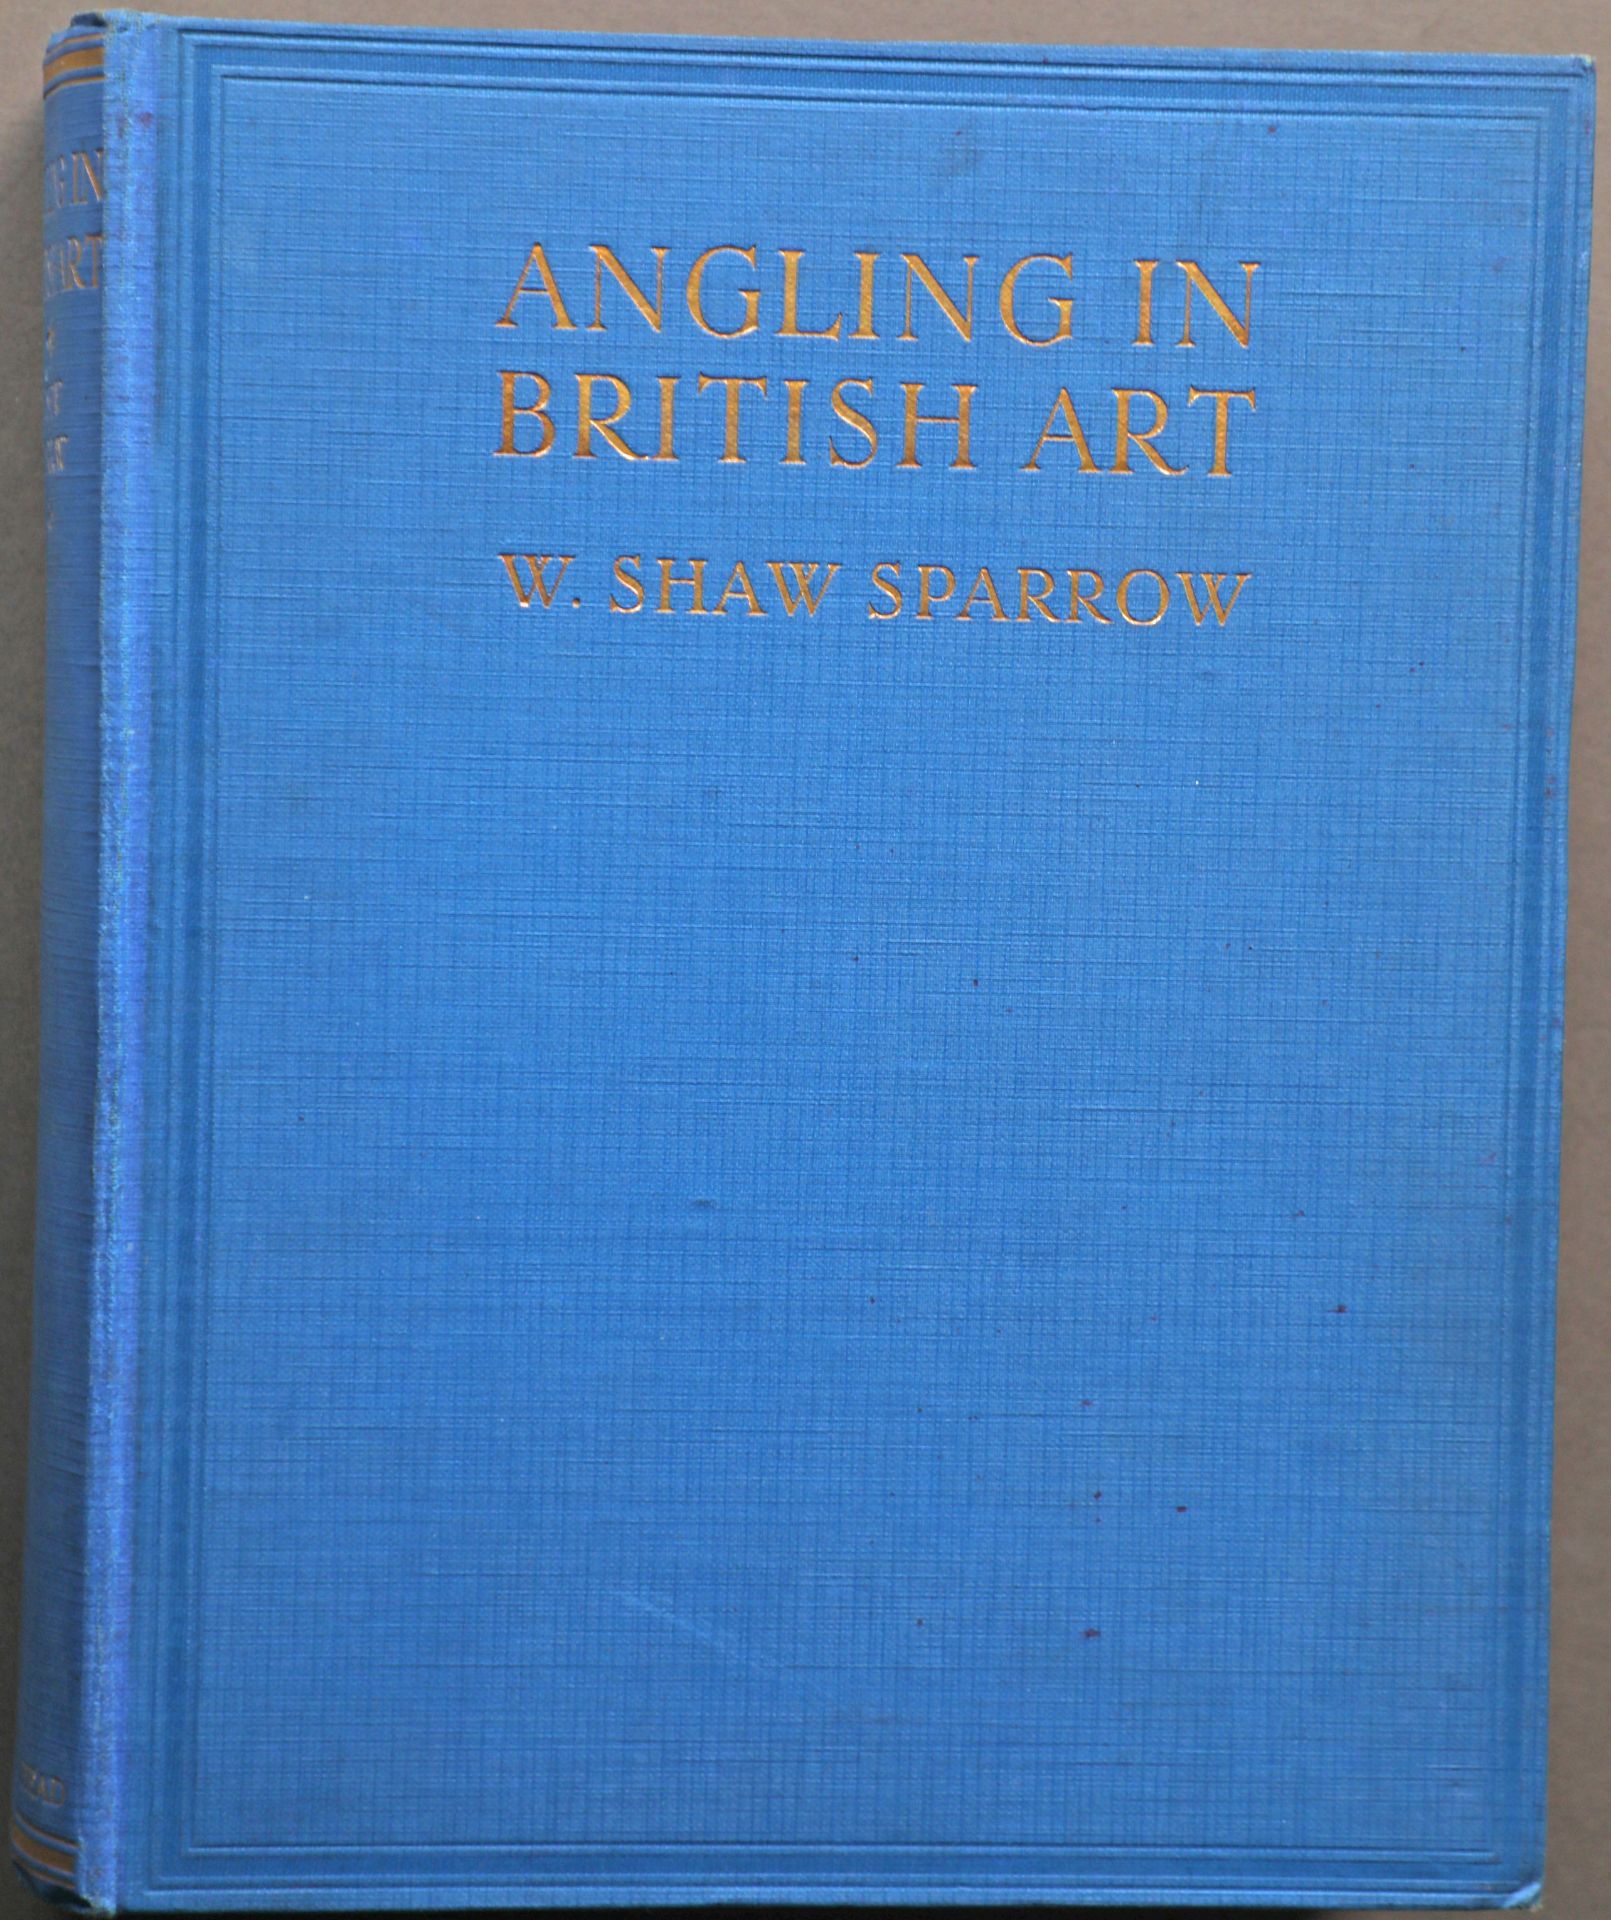 Angling in British Art, W Shaw Sparrow, The Bodley Head, 1st ed 1923, demi 4to, blue cloth, - Image 2 of 10